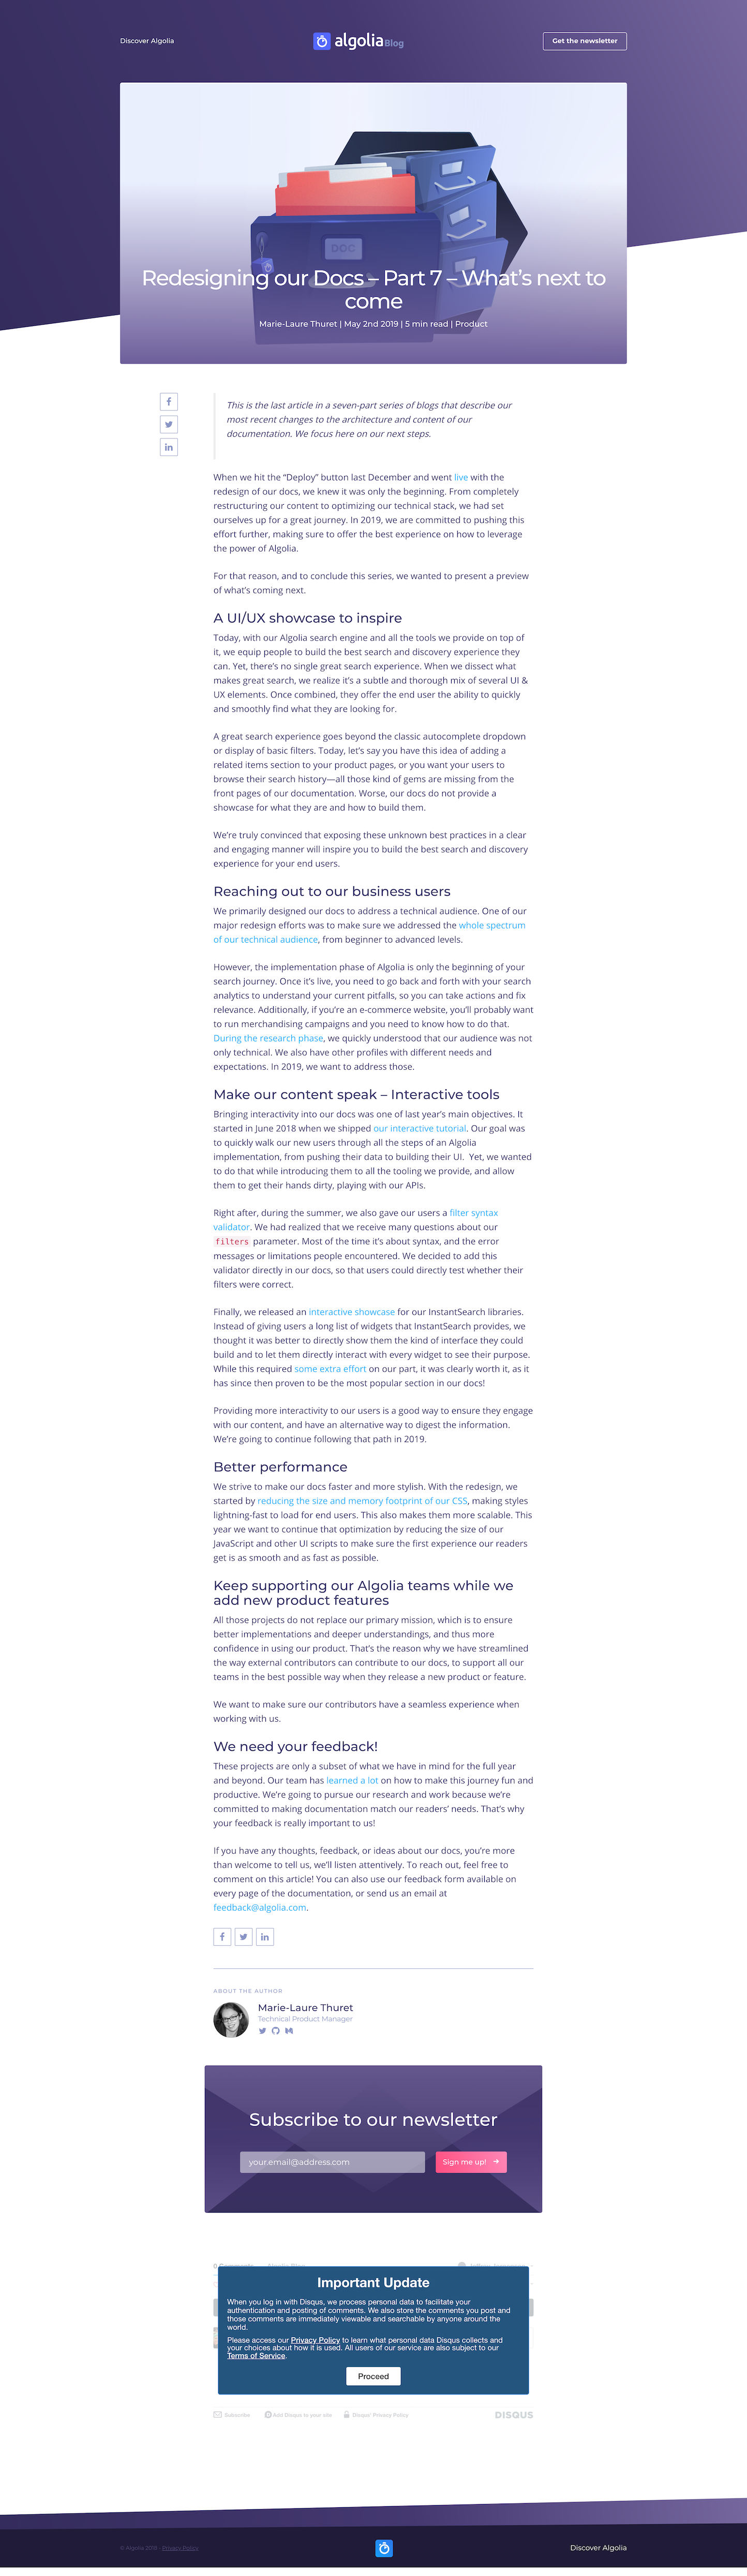 Screenshot of the Blog - Article page from the Algolia website.